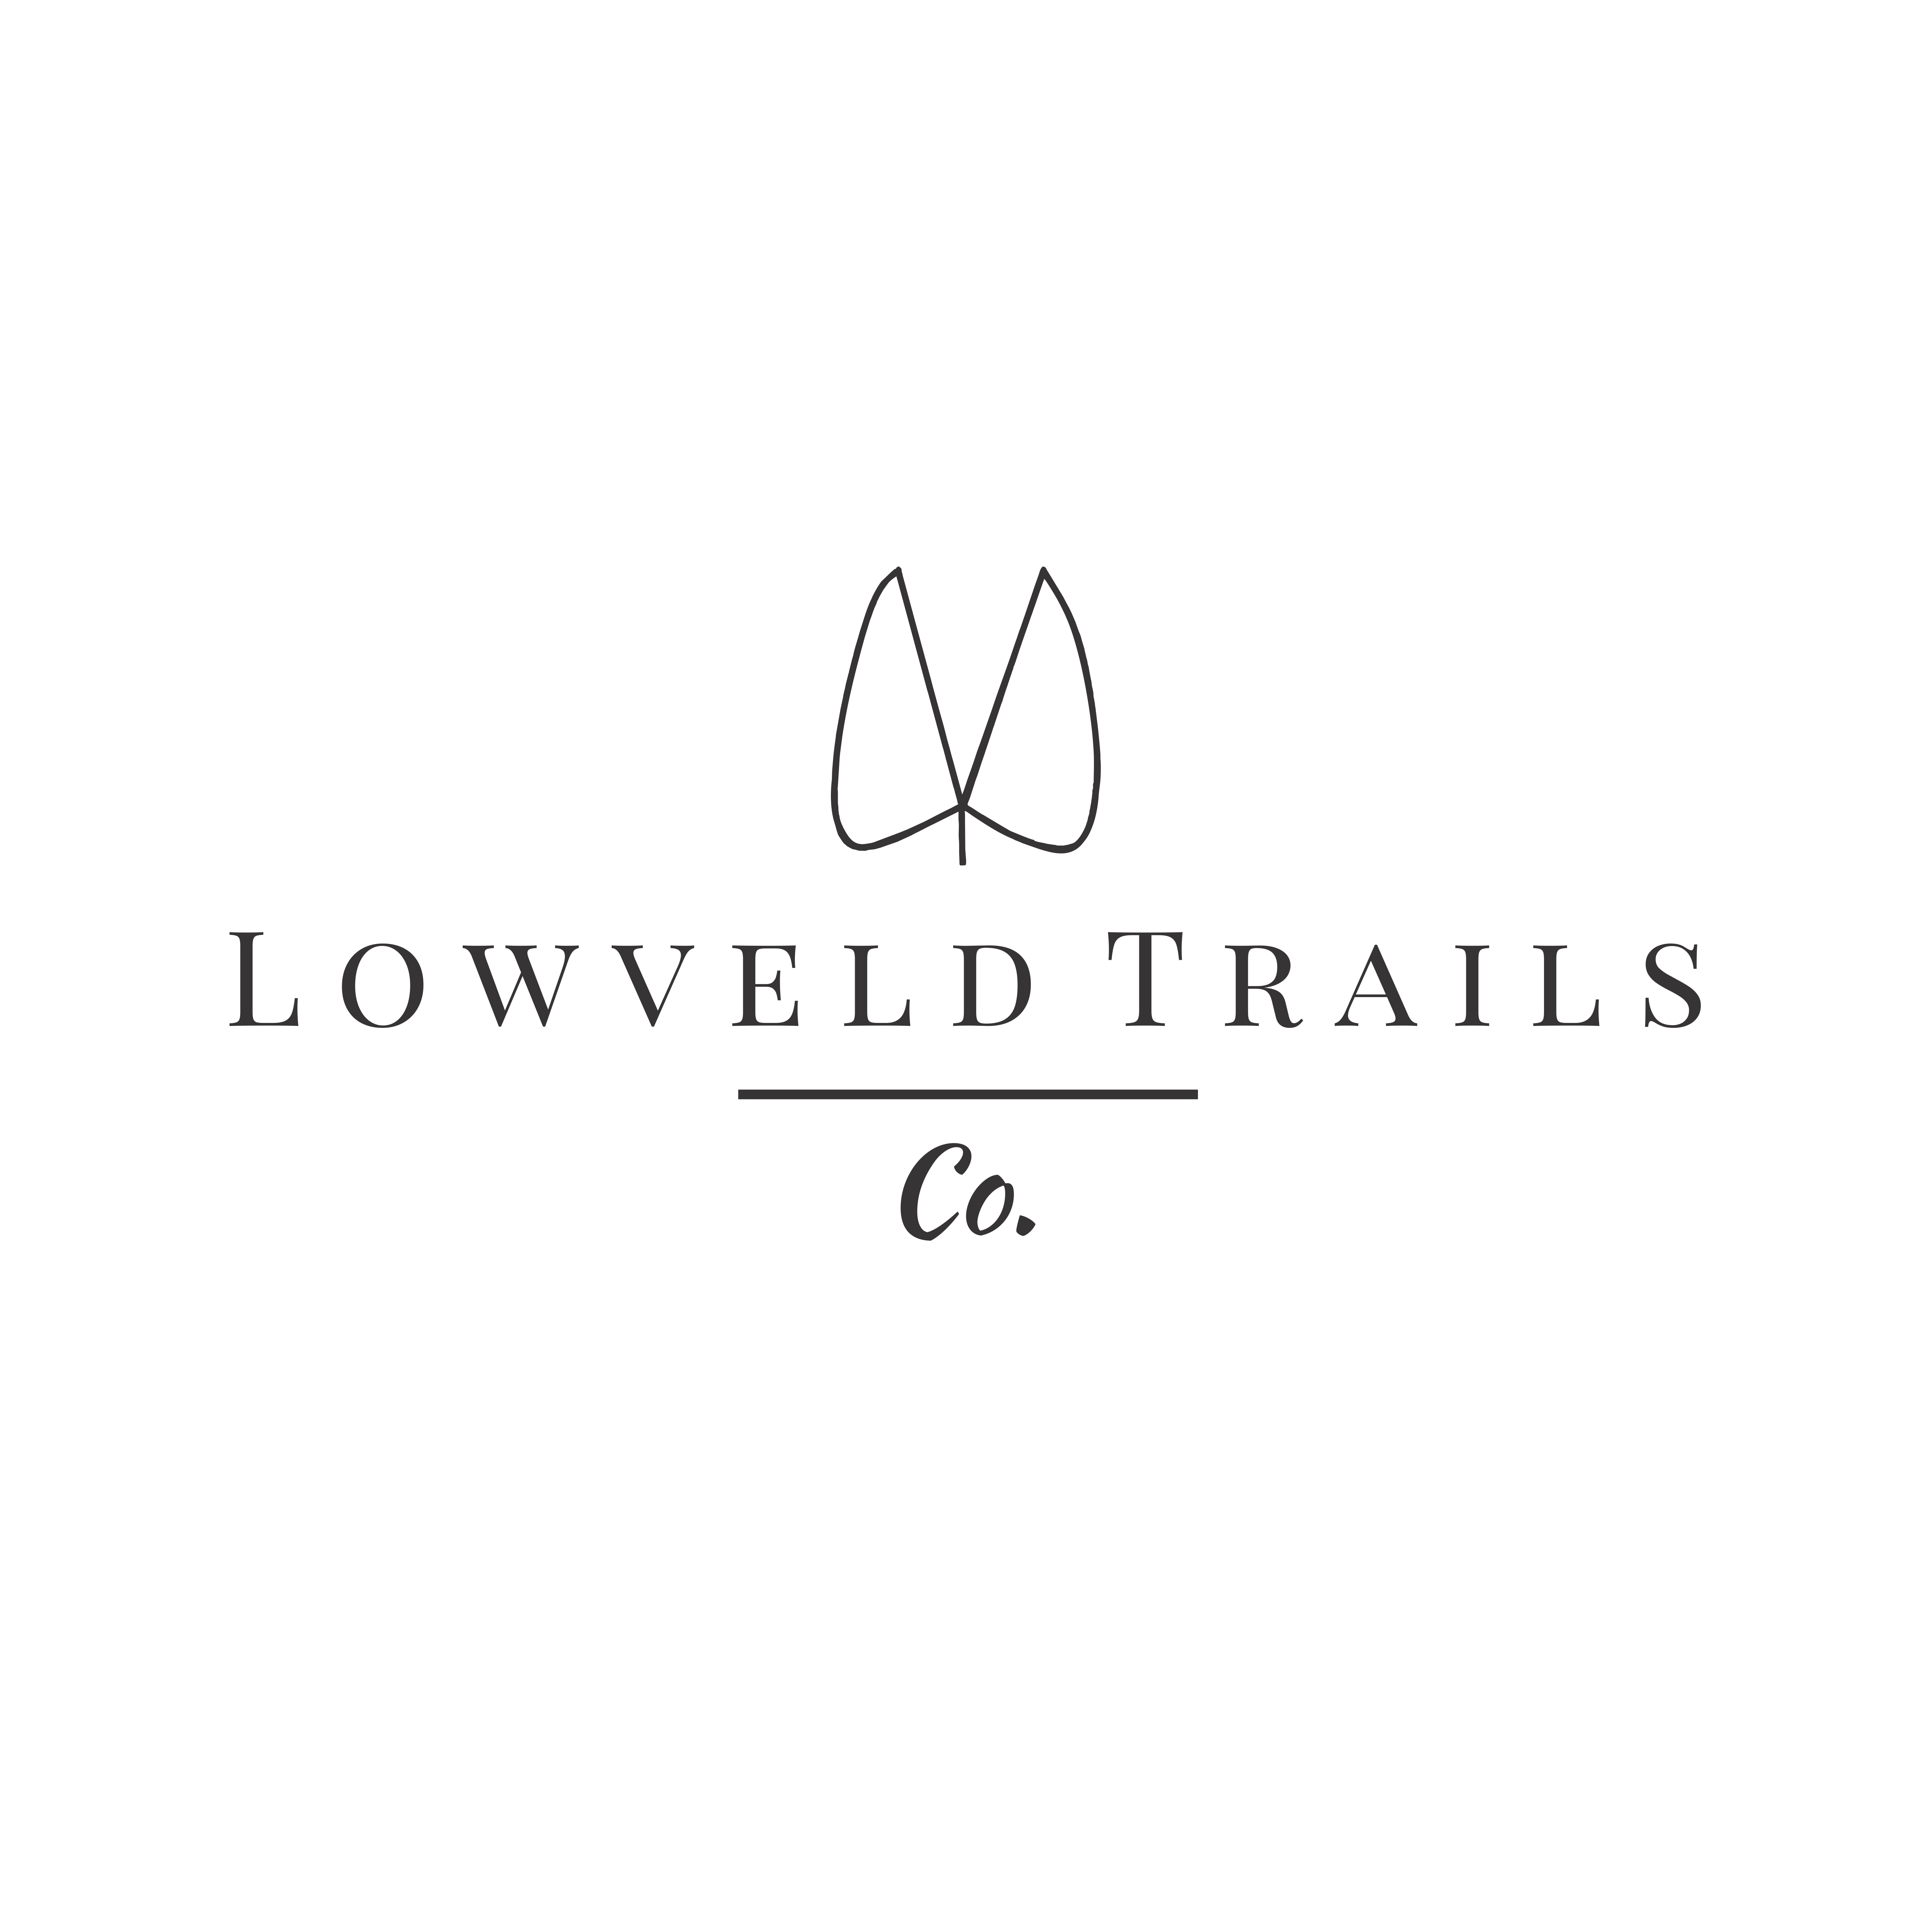 Lowveld Trails Co.